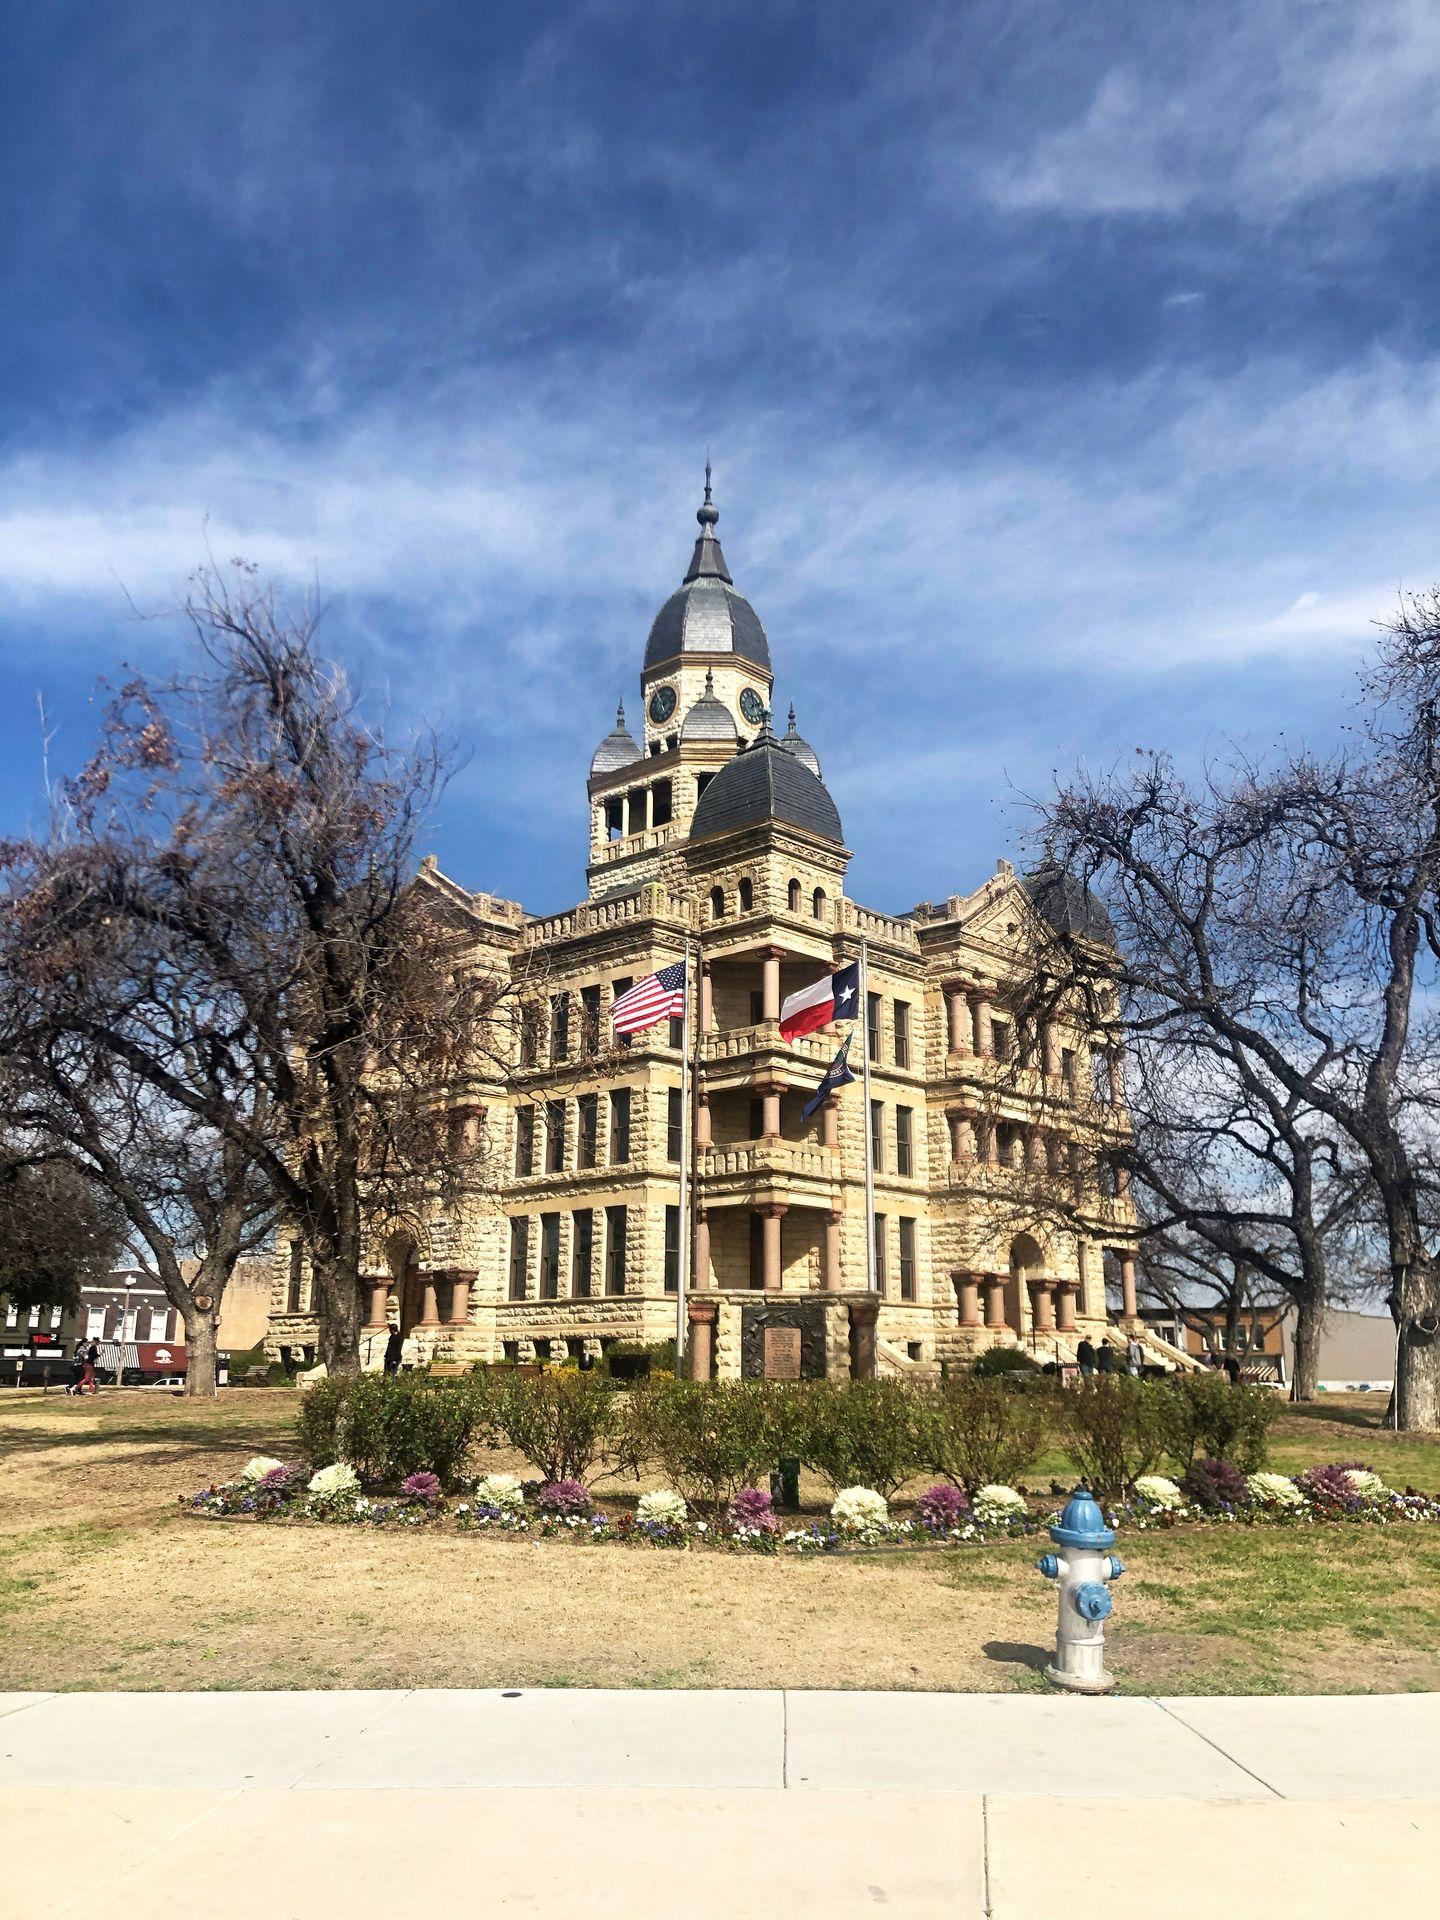 A photo of the Denton Courthouse in the Denton Downtown Square.